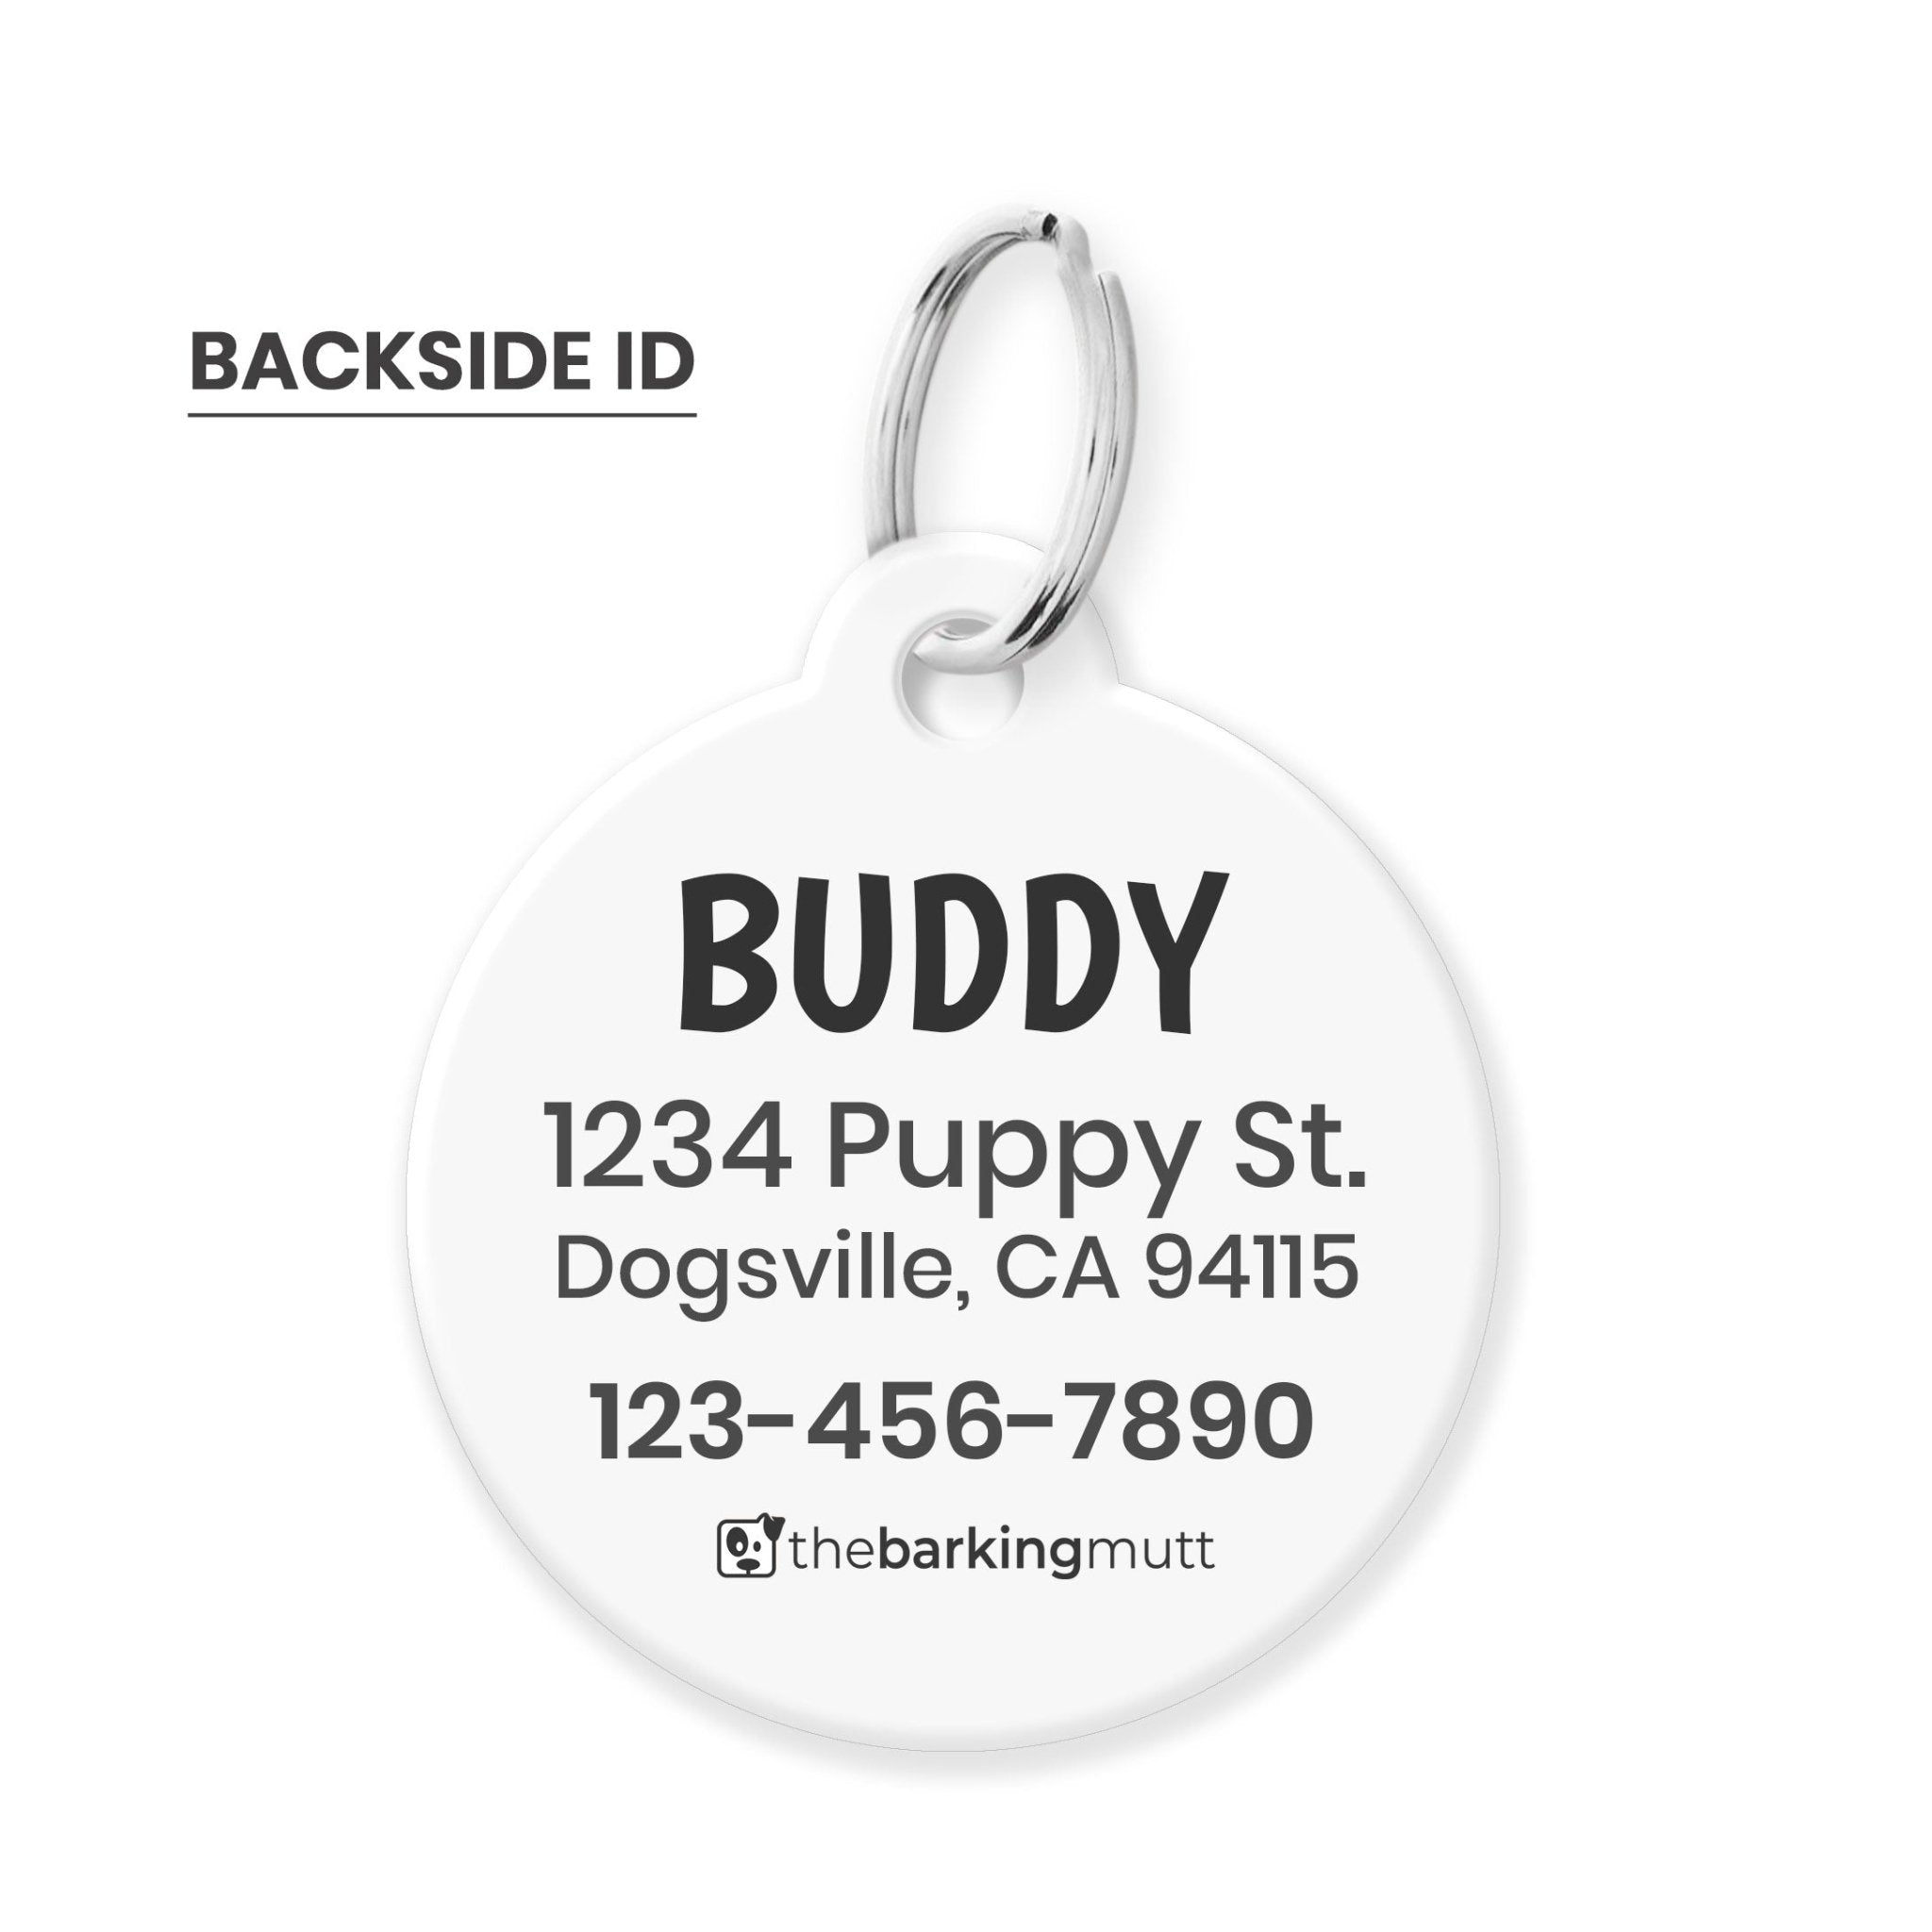 Raise the Ruff Funny Pet Tag - The Barking Mutt